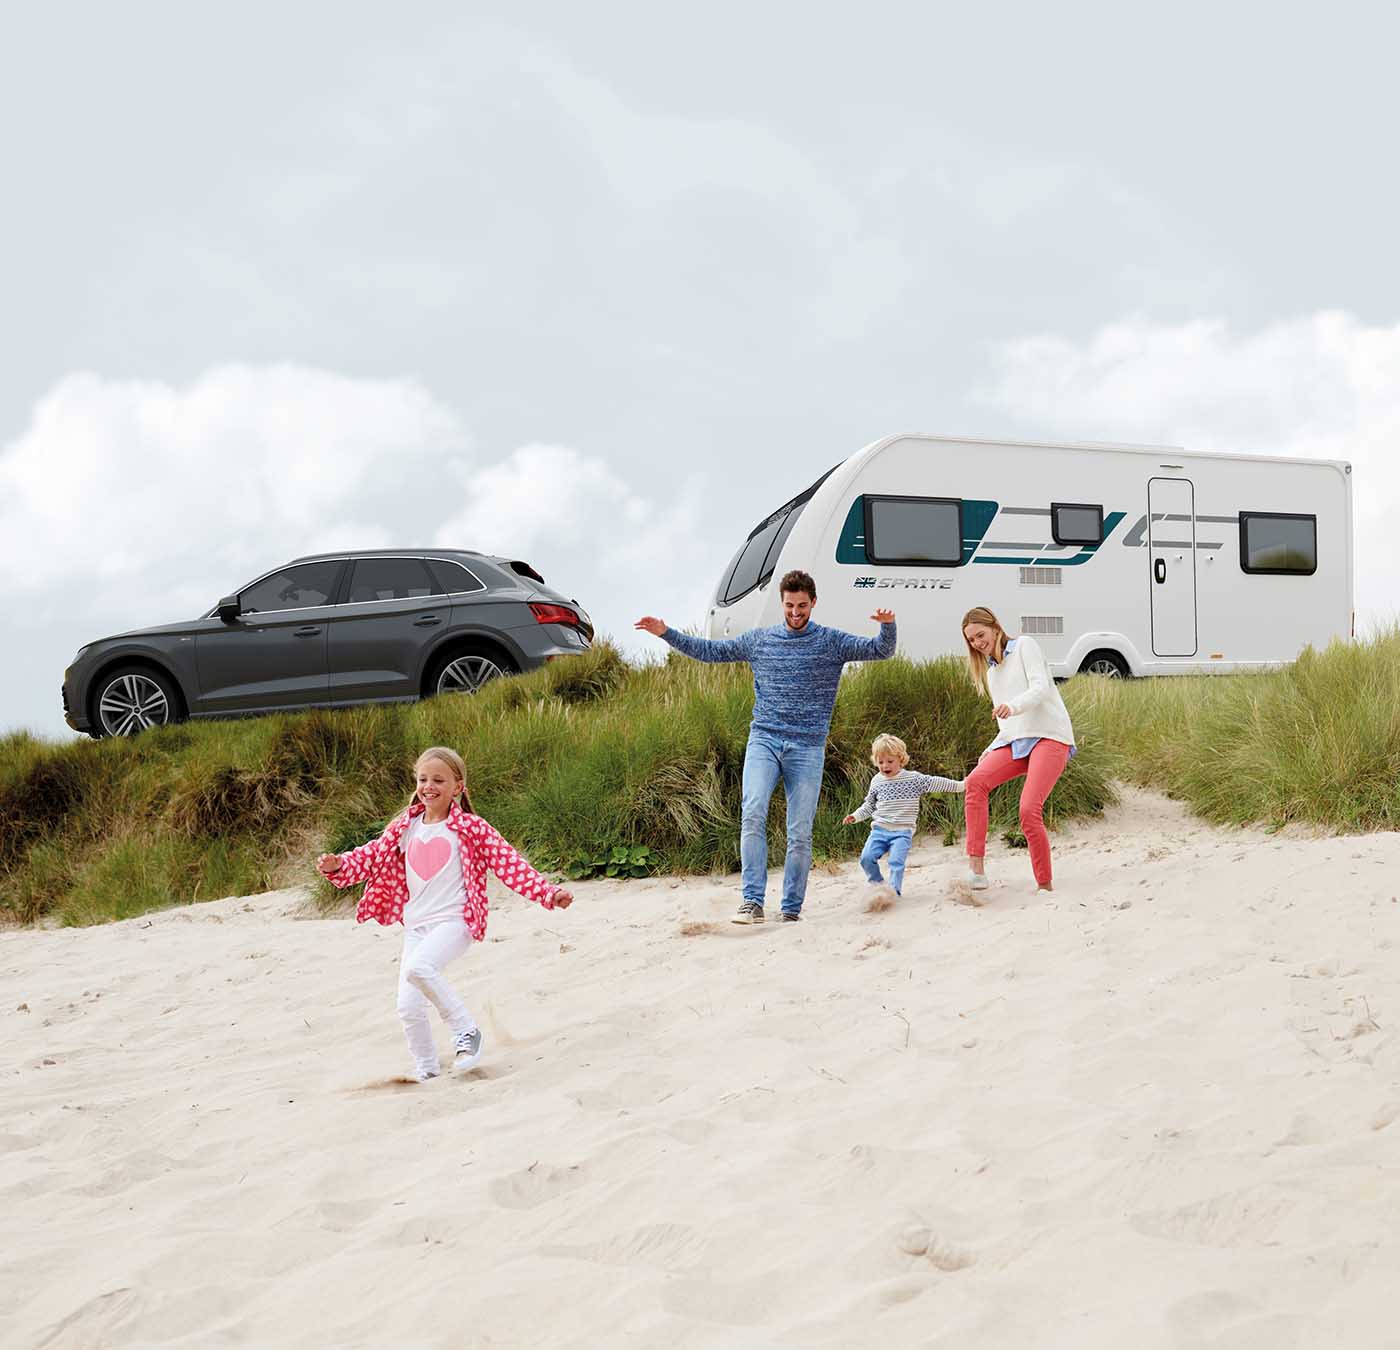 a family towing their caravan holiday on the beach